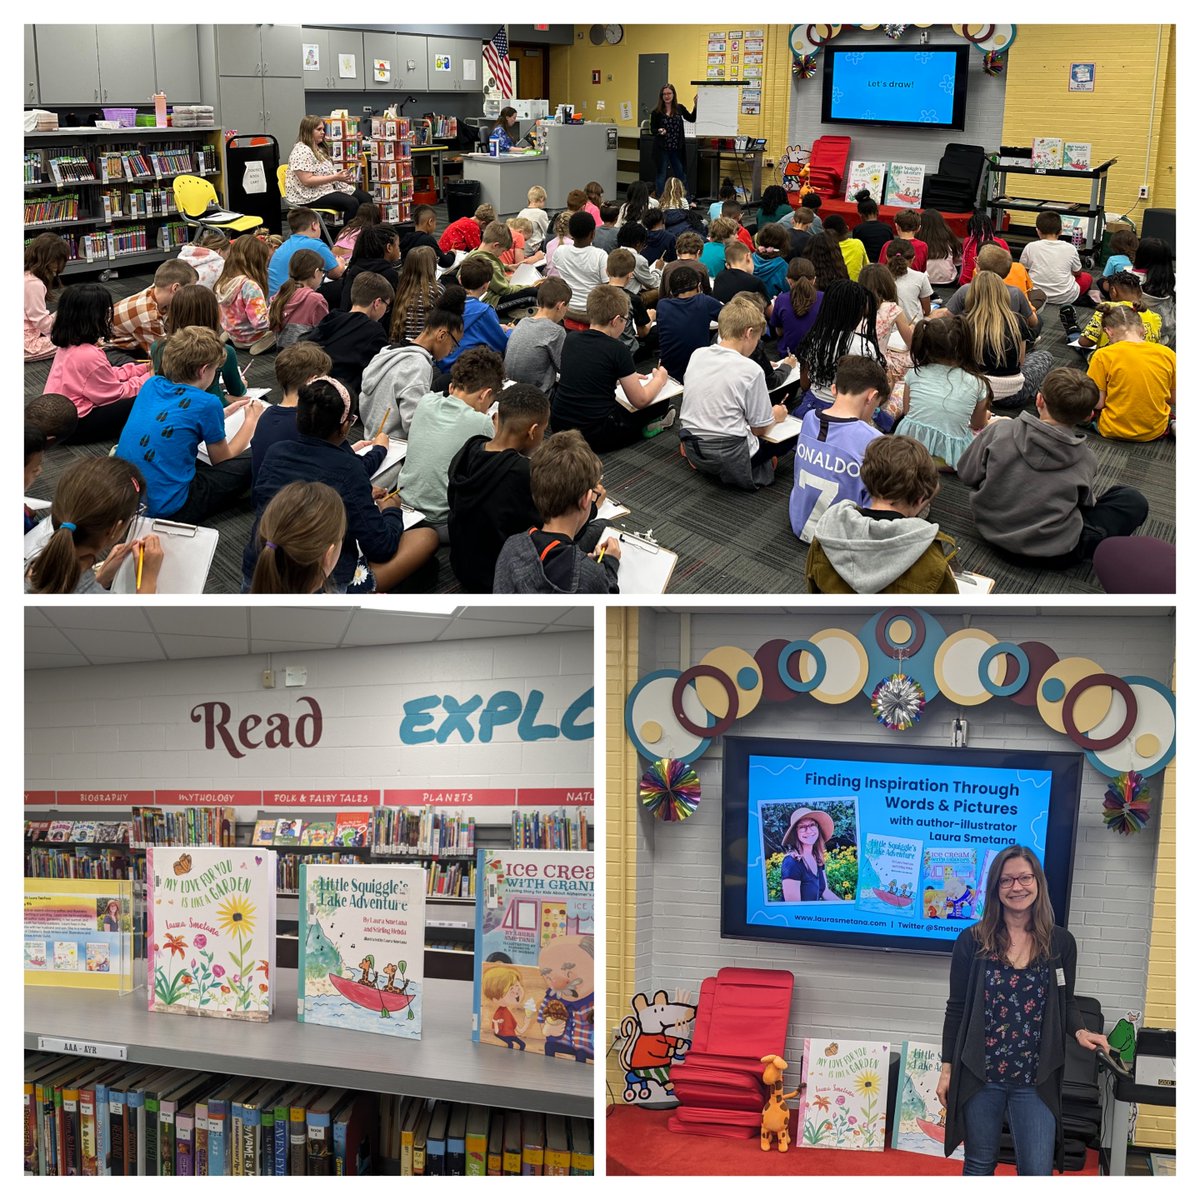 Thank you @GoodrichSchool K-6 graders for a great #authorvisit last week! I had so much fun reading together, discussing finding inspiration, making idea notebooks & drawing together with you! 📚✏️ 🌻

@Woodridge68 #kidlit #schoolvisit #author #illustrator